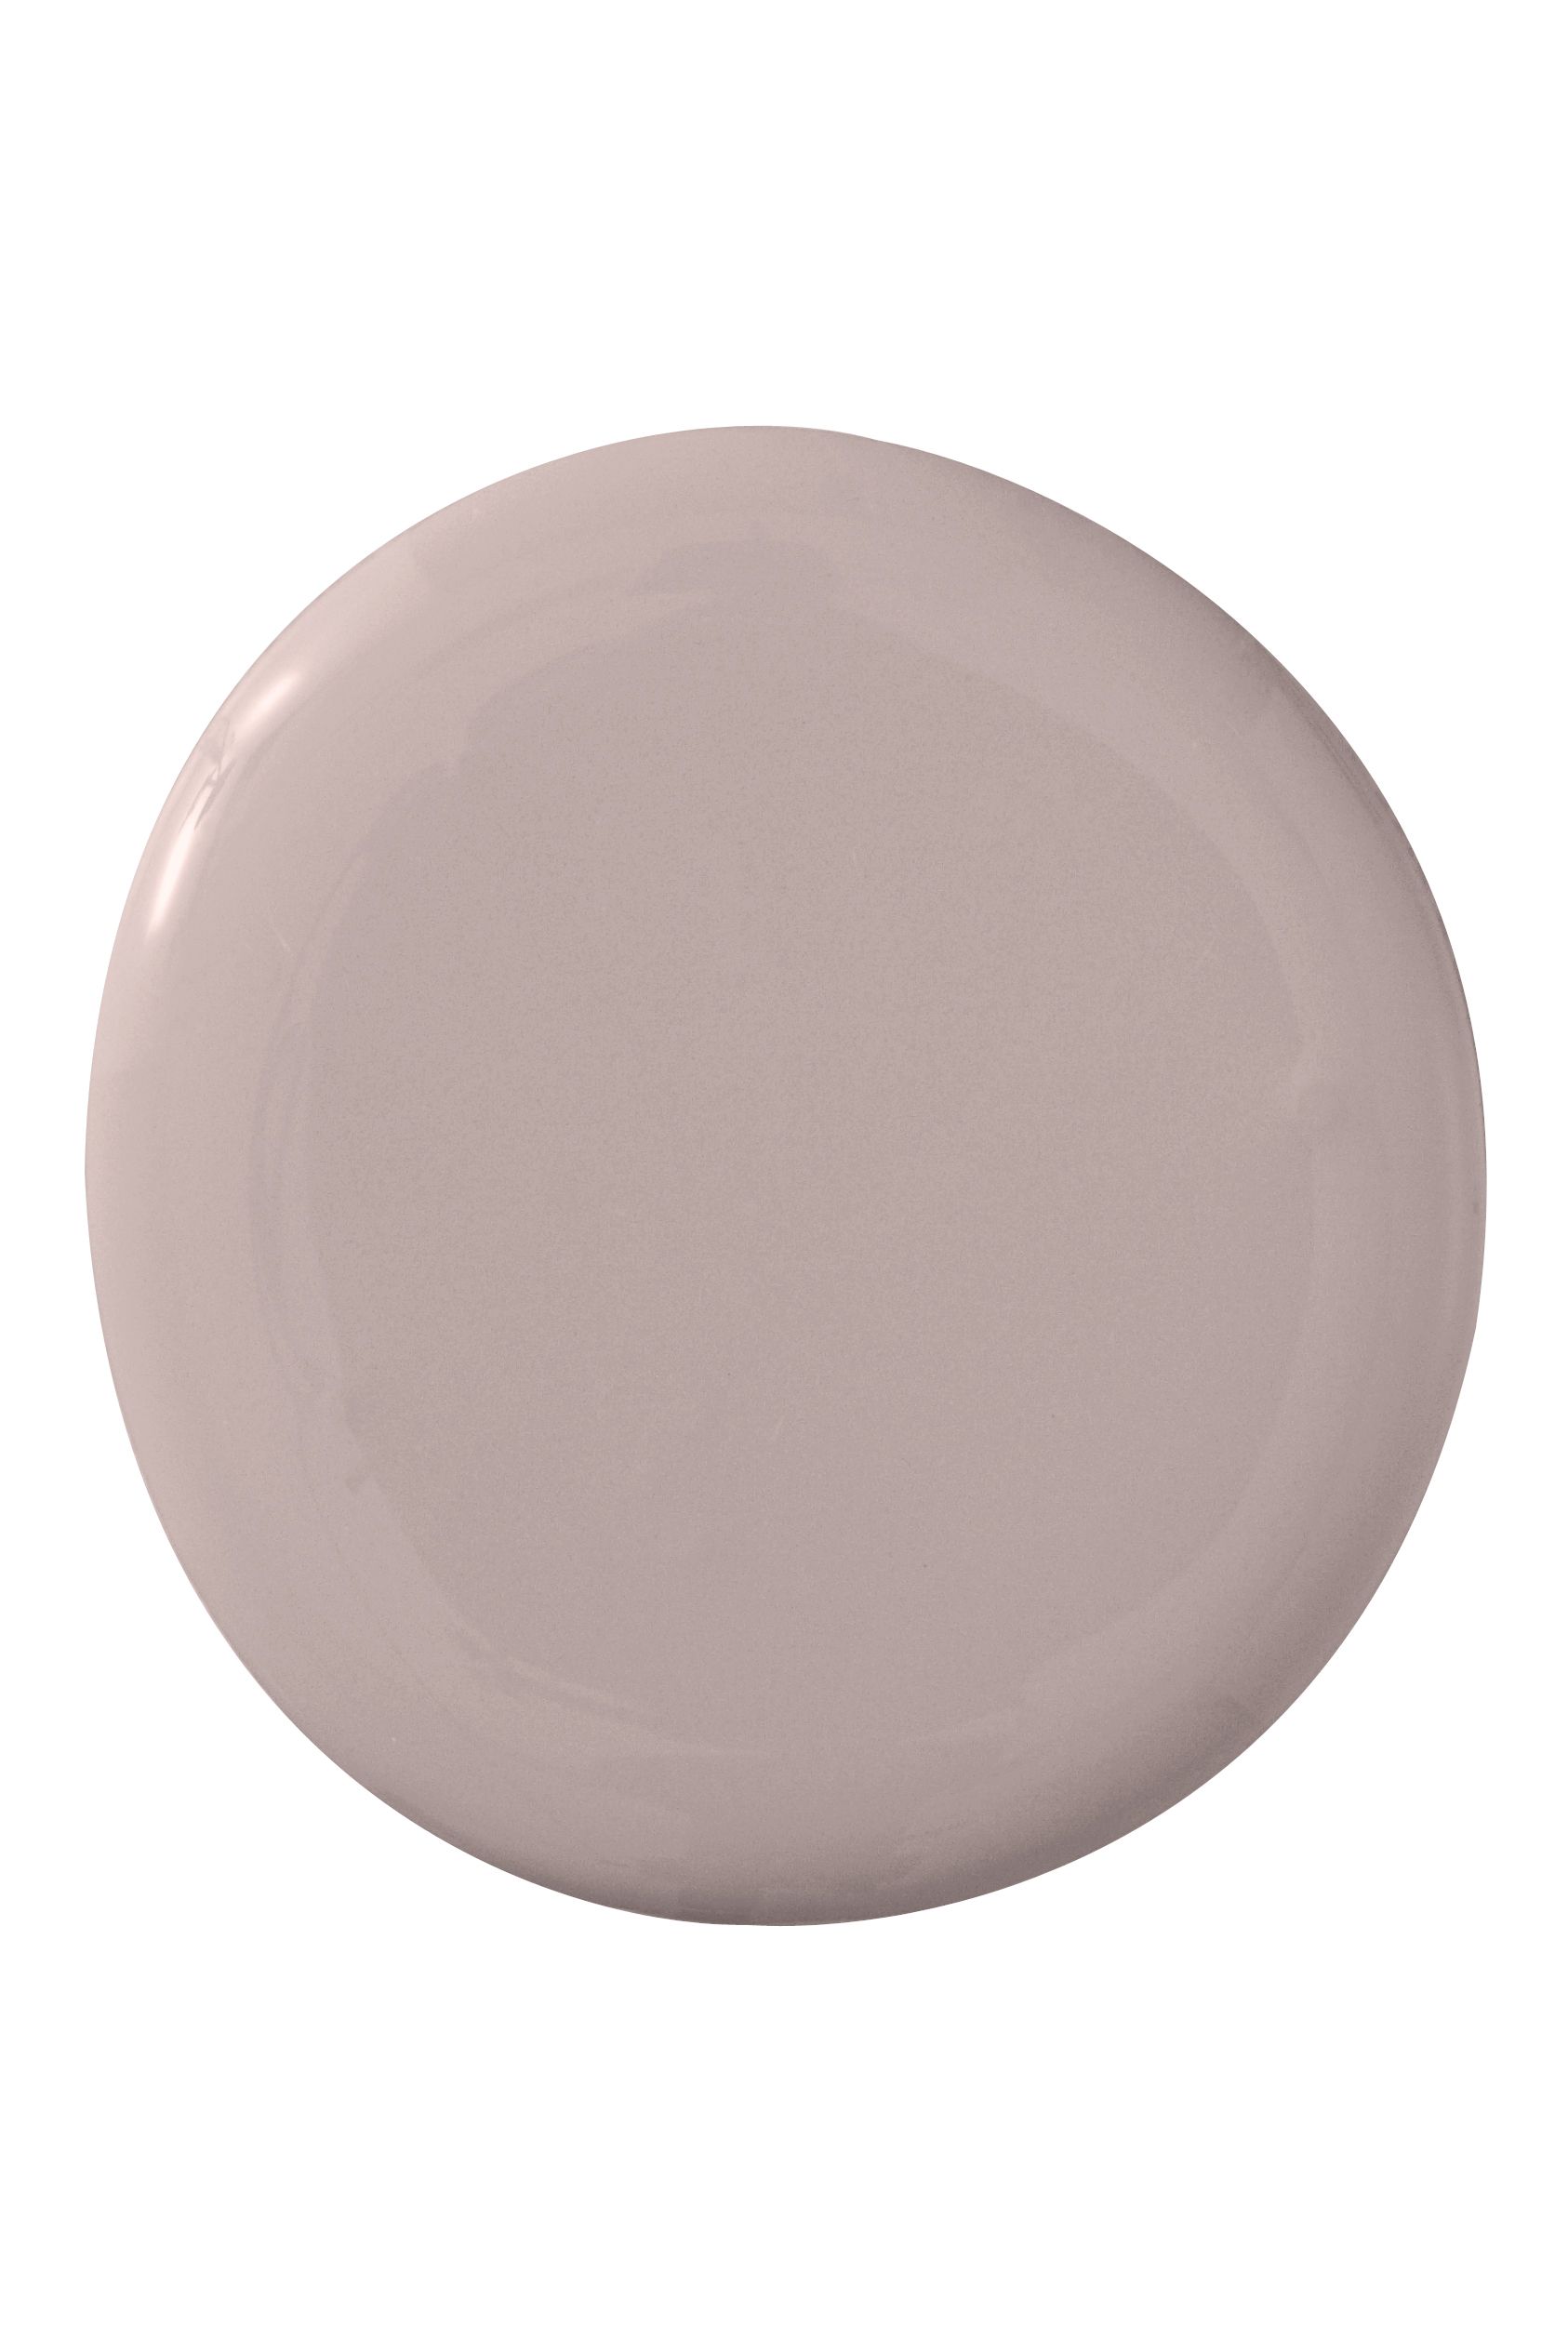 Behr Taupe Color Paint Chart